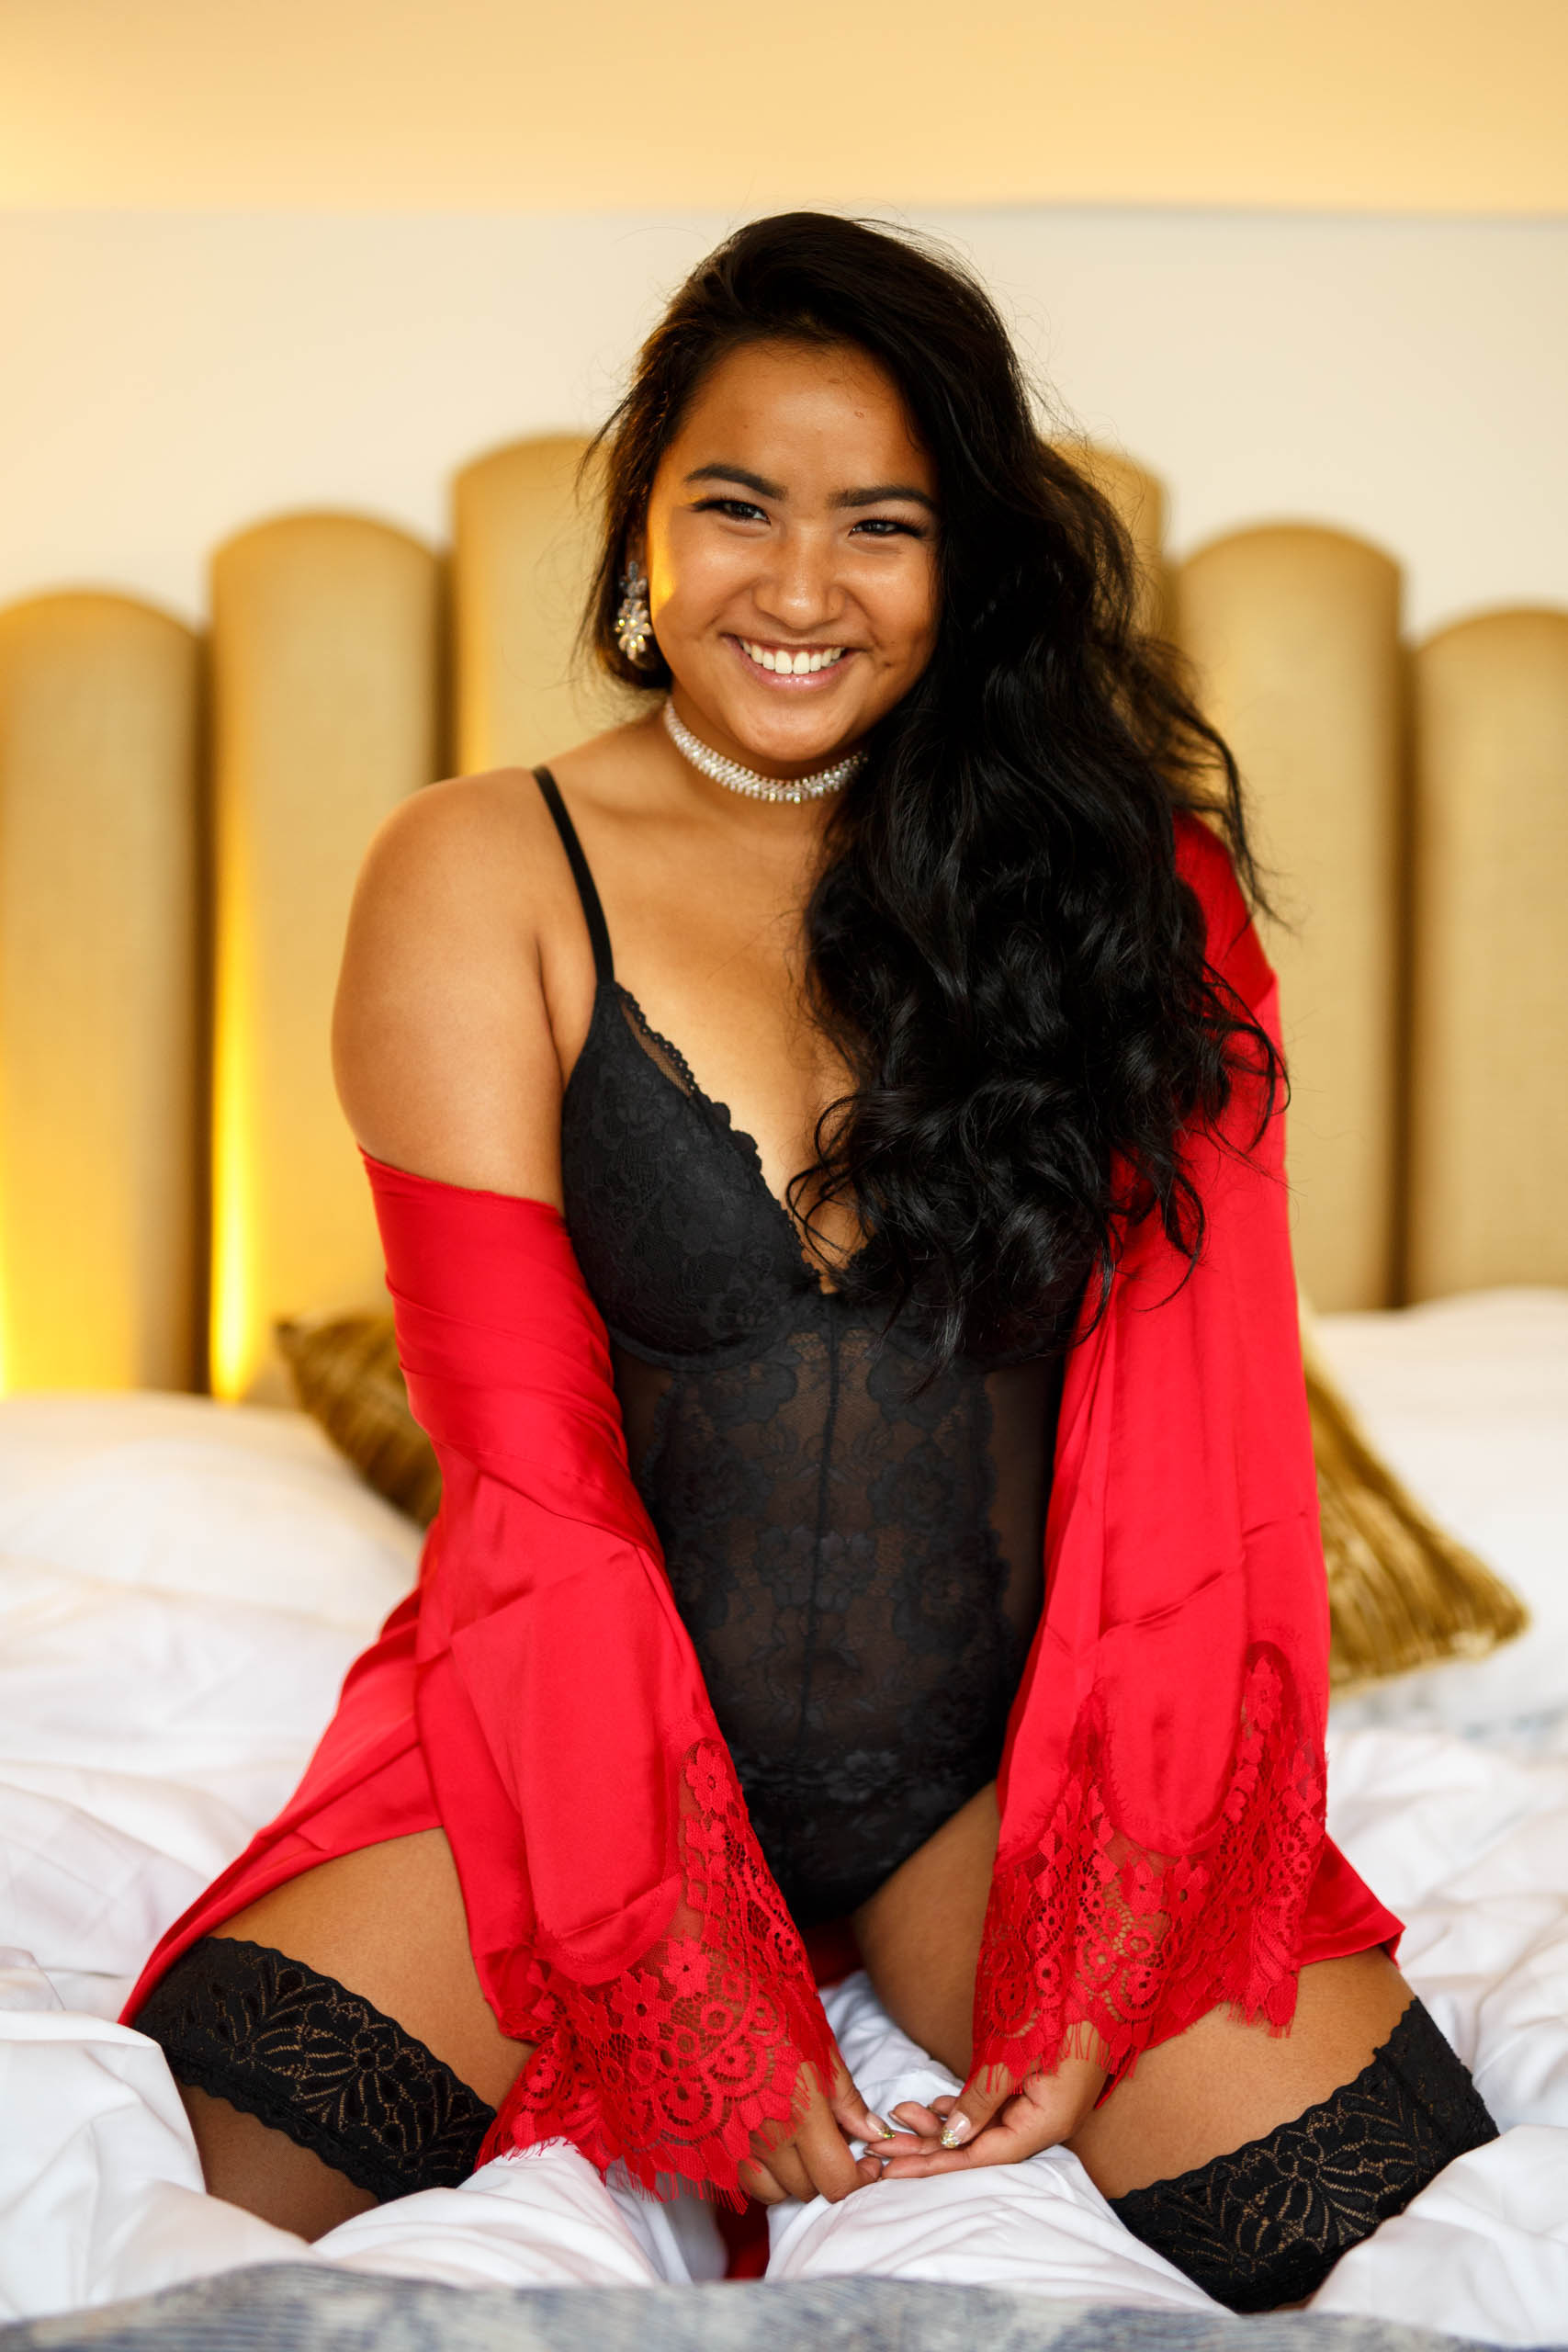 A woman in a red robe and stockings participating in a boudoir photo shoot, showing off the allure and benefits (advantages) of such an intimate setting.